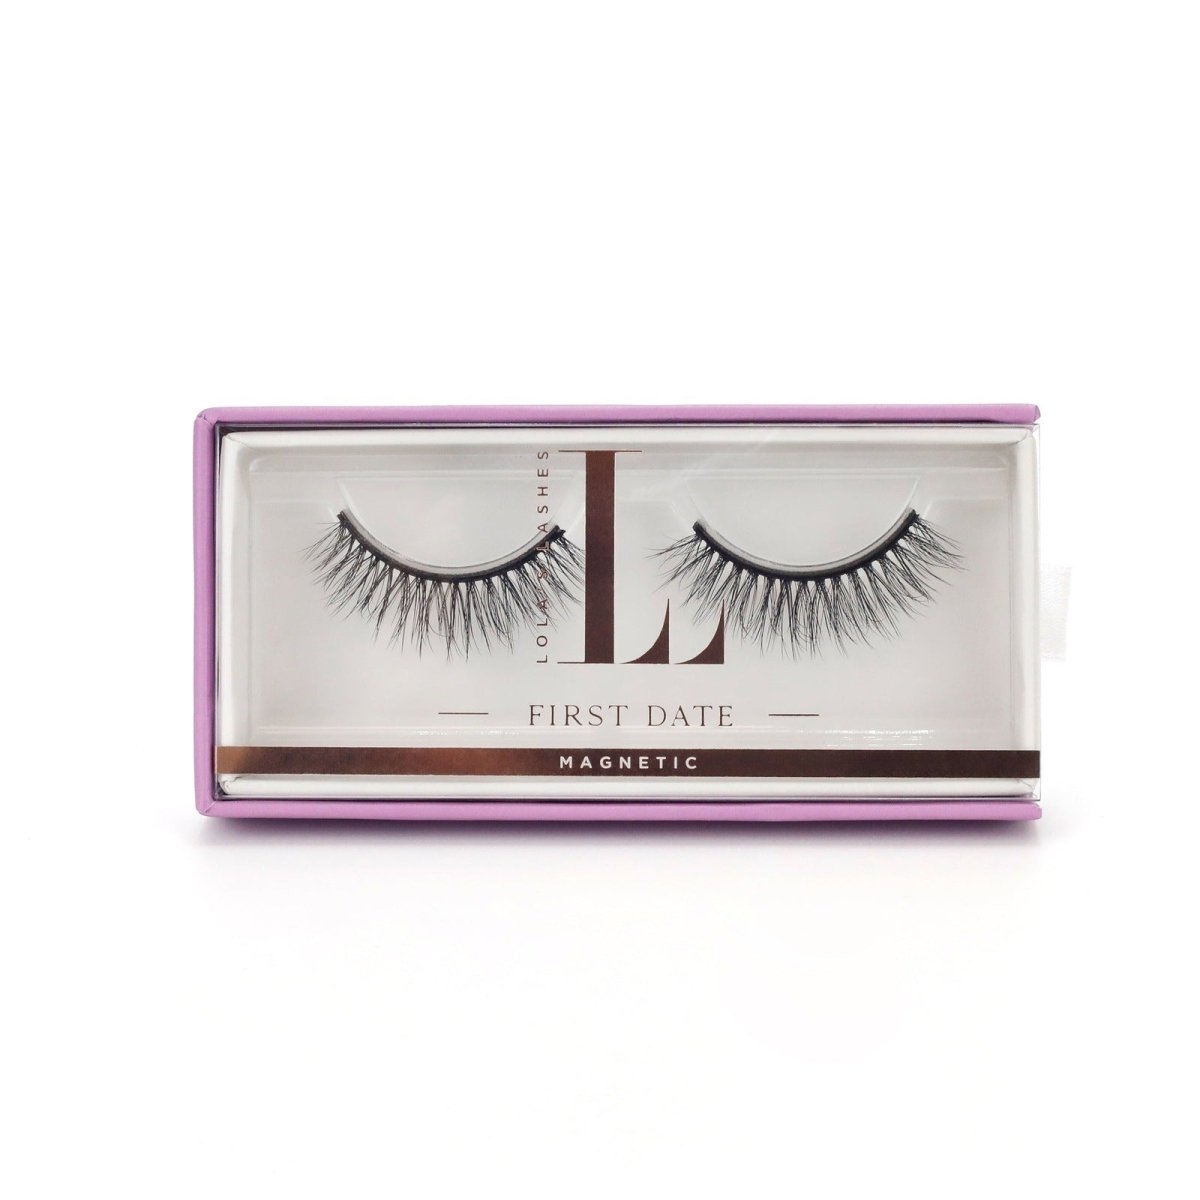 First Date Magnetic Lashes - Lola's Lashes